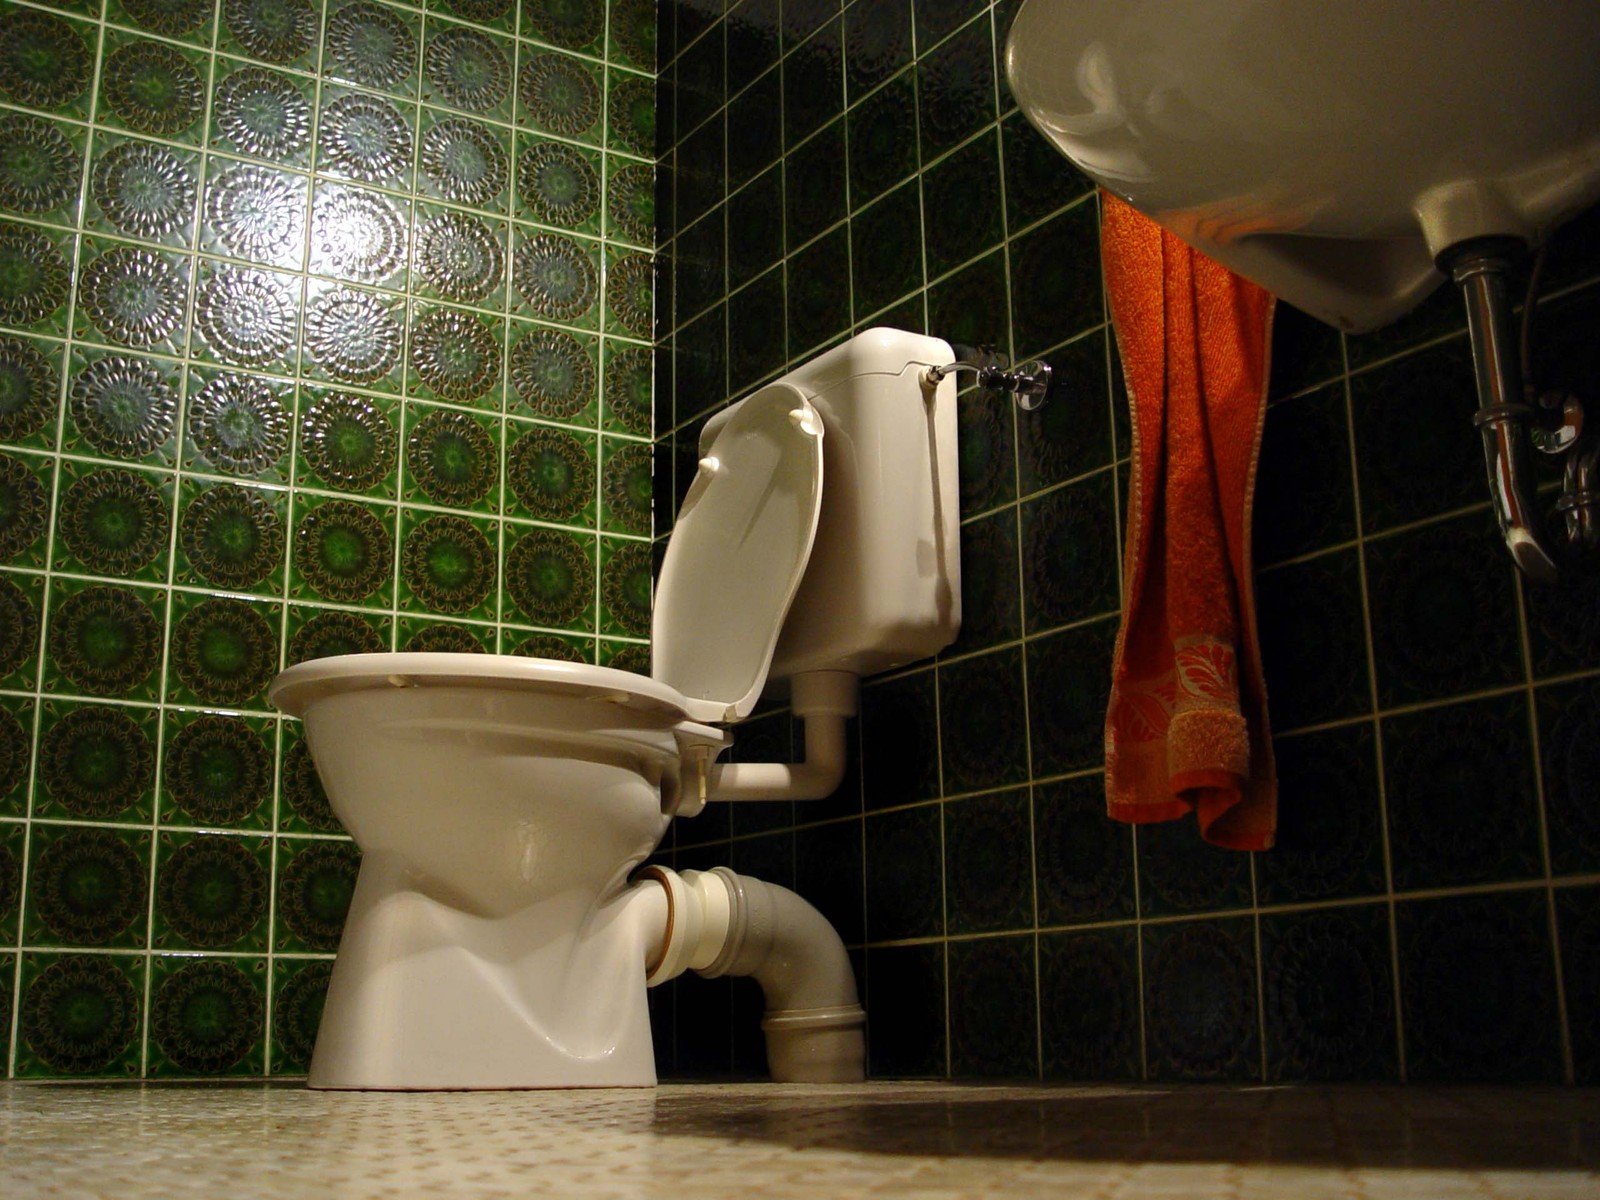 a clean white toilet in front of green tile